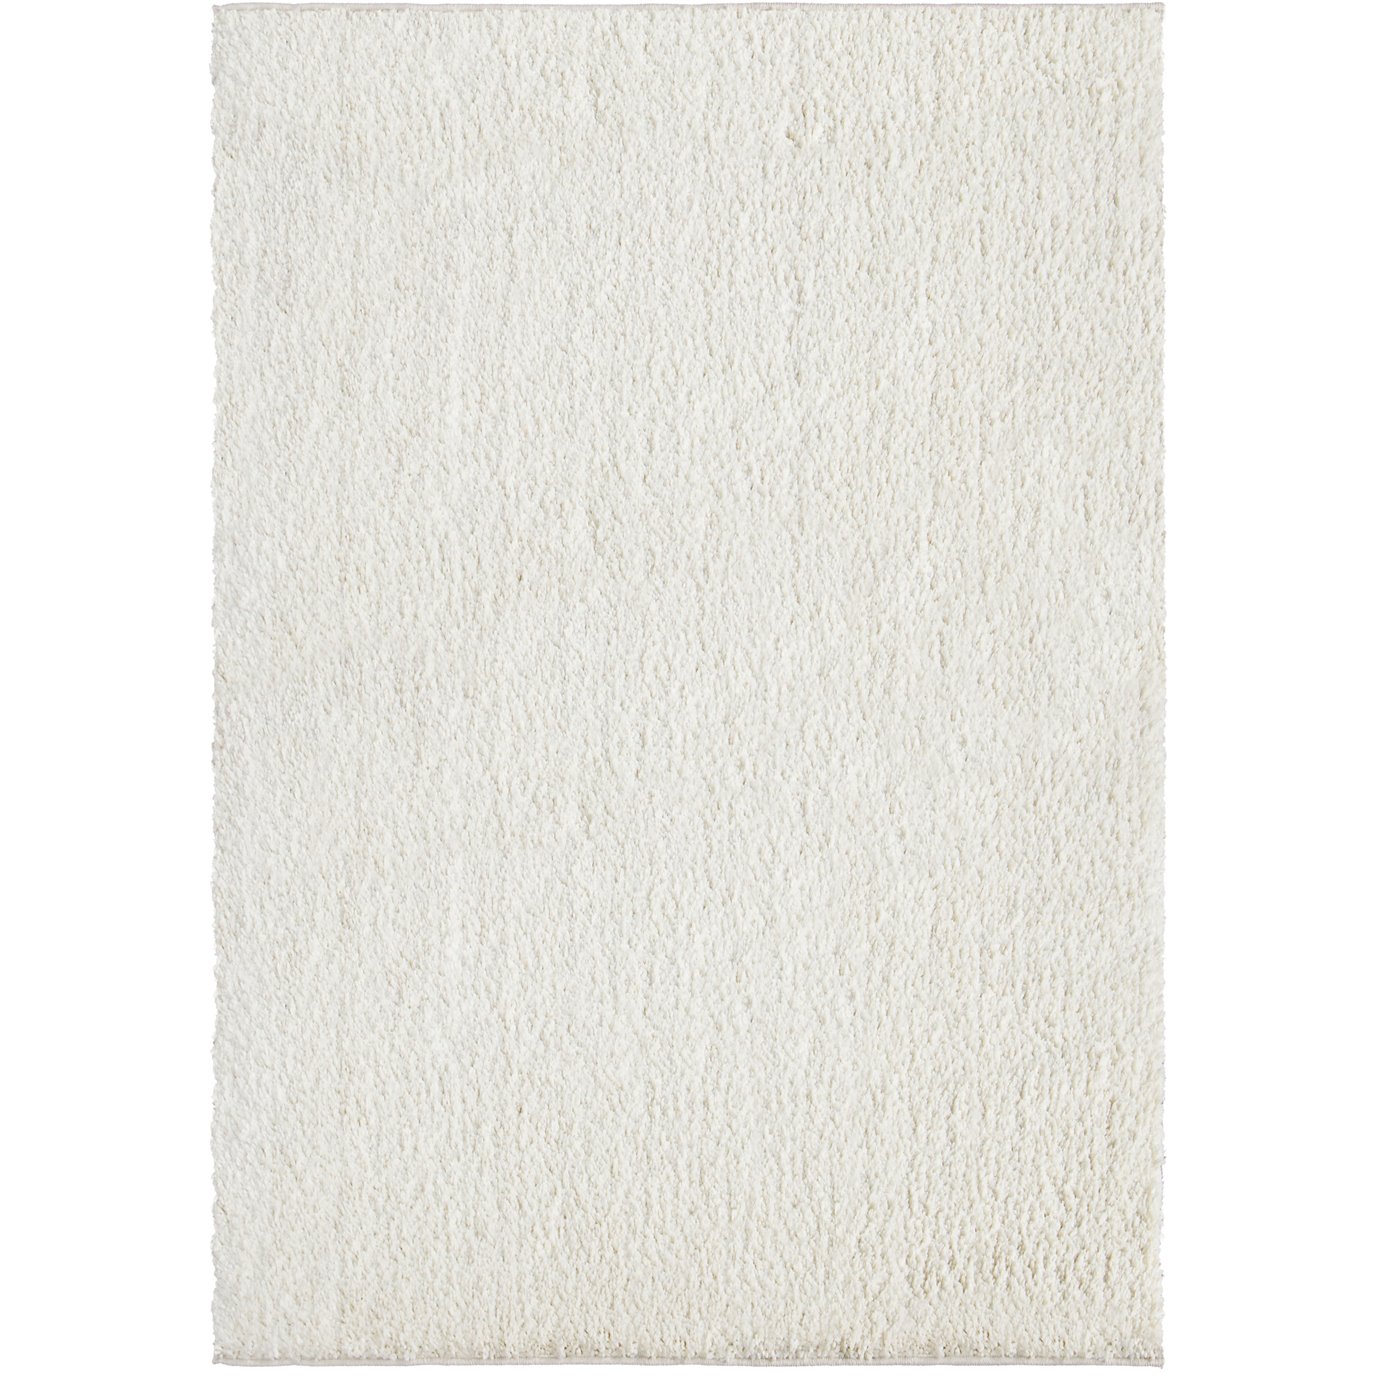 Solid White 5'3"x7'6" Rug